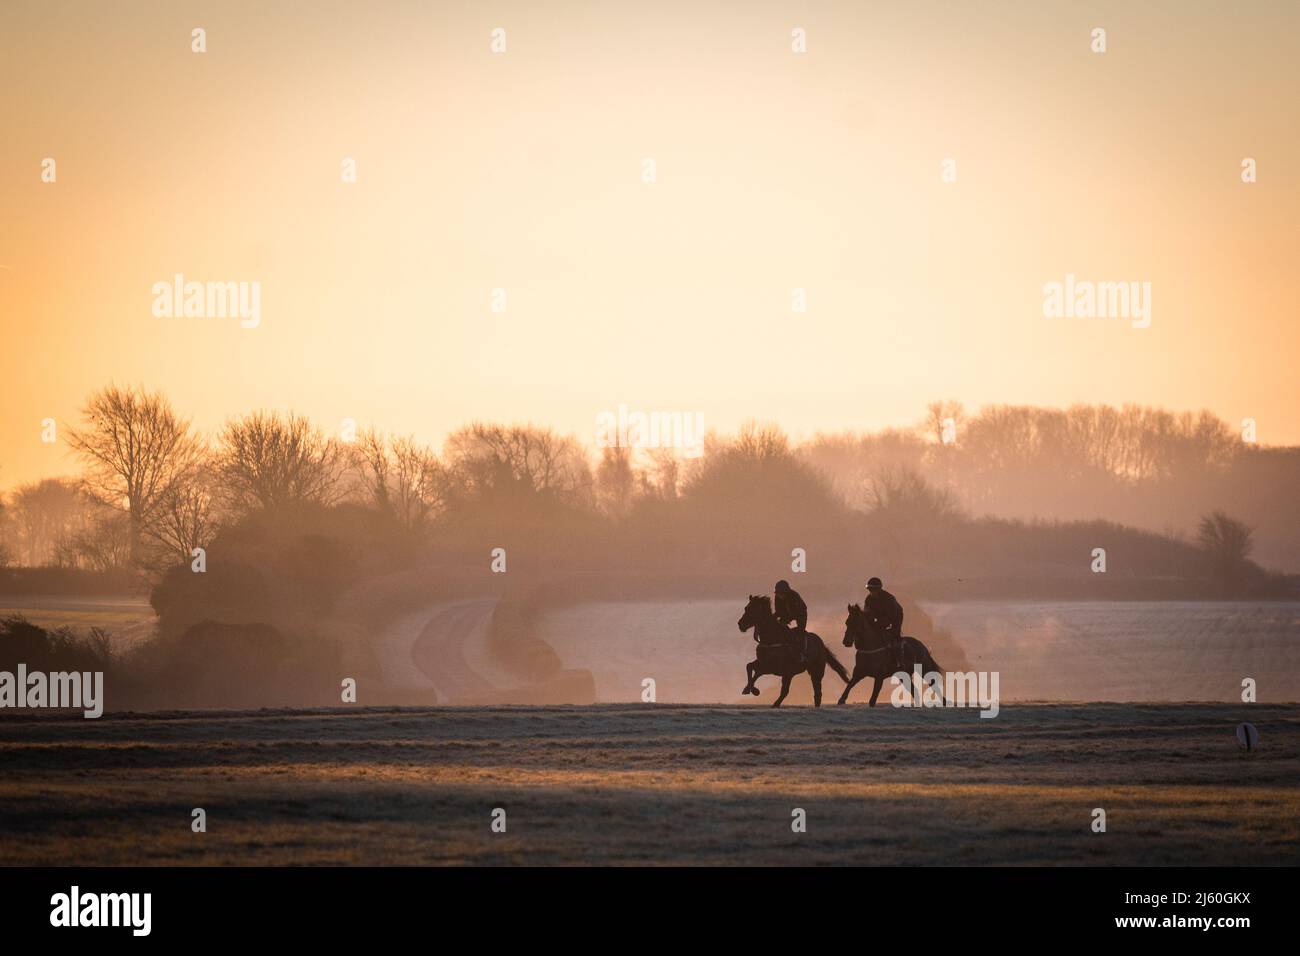 Lambourn Gallops, Berkshire UK  14 January 2022  Racehorses traing at dawn at the gallops above Upper Lambourn in the Berkshire Downs.  A frosty morni Stock Photo